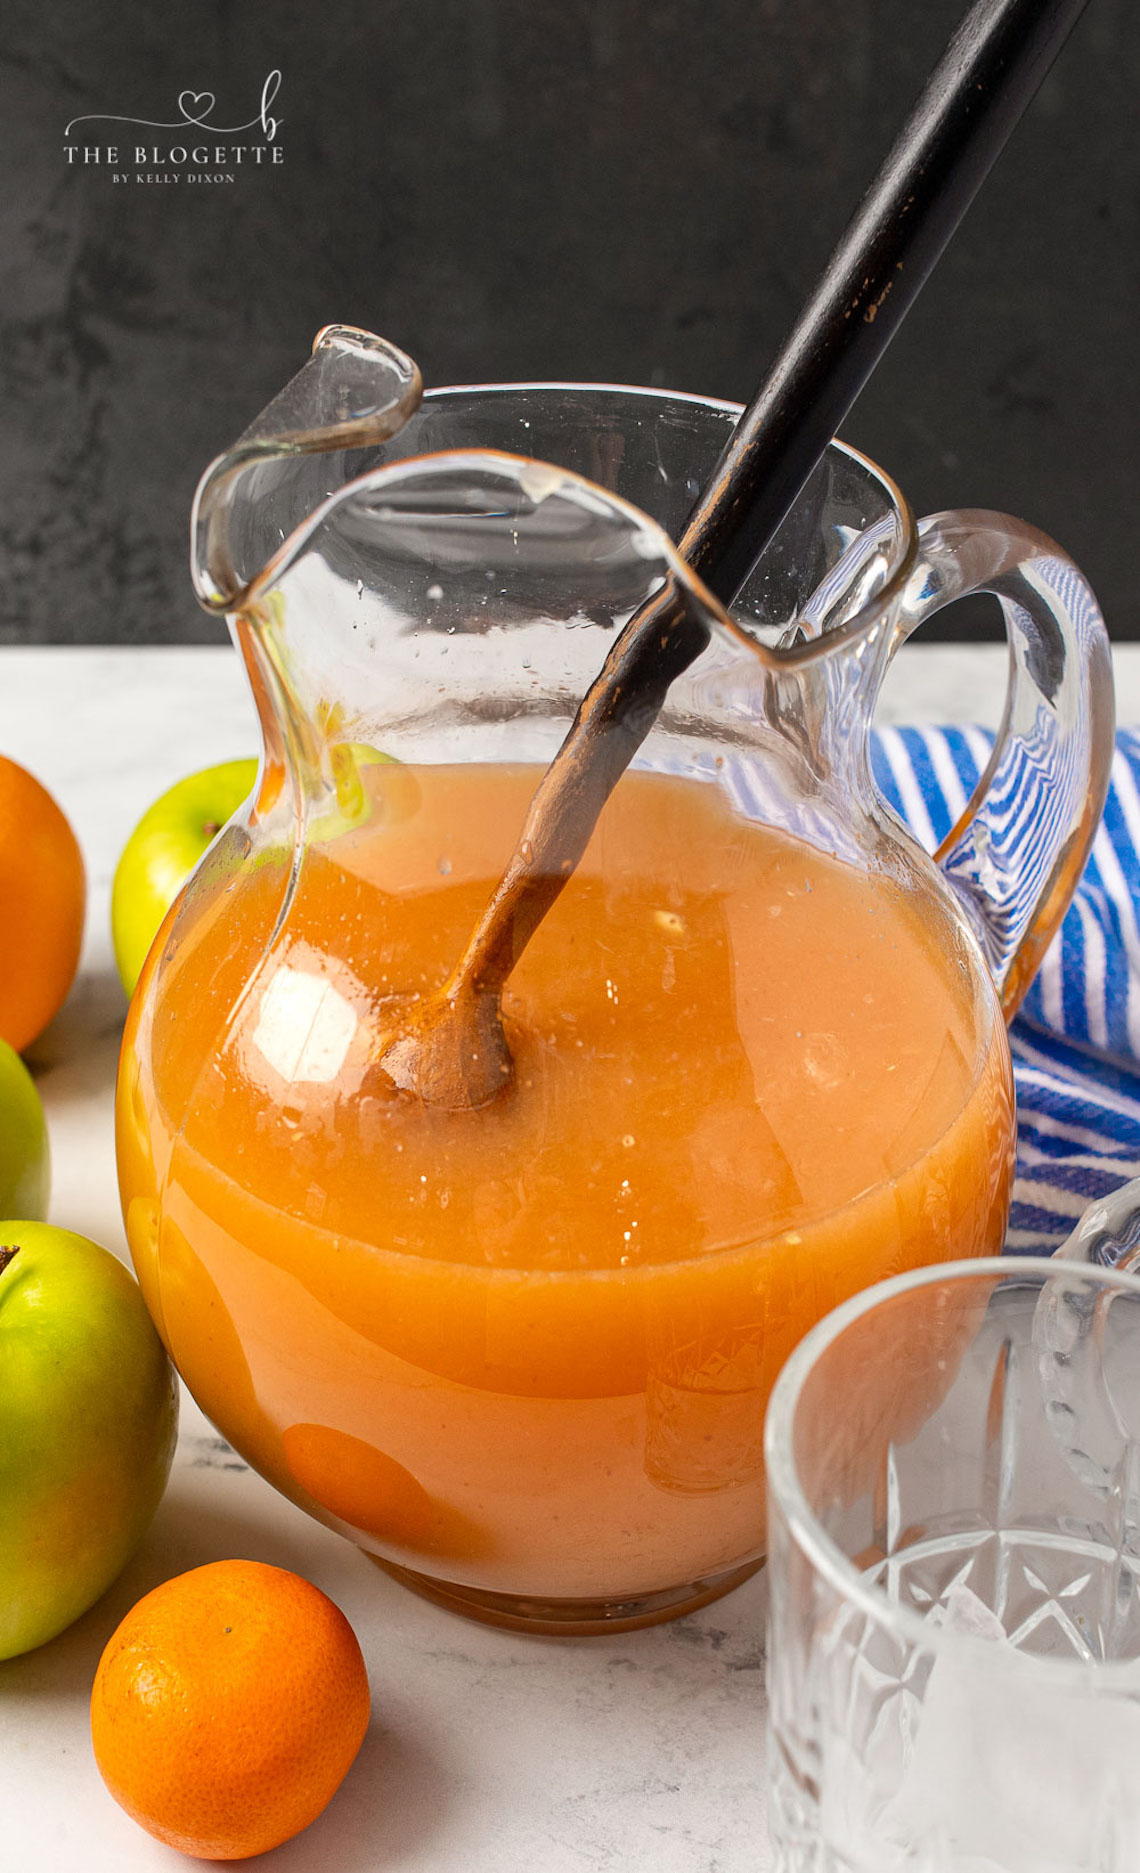 A fun Morning Punch is a perfect way to kick of a special day. This drink is easy to prepare and everyone loves it!